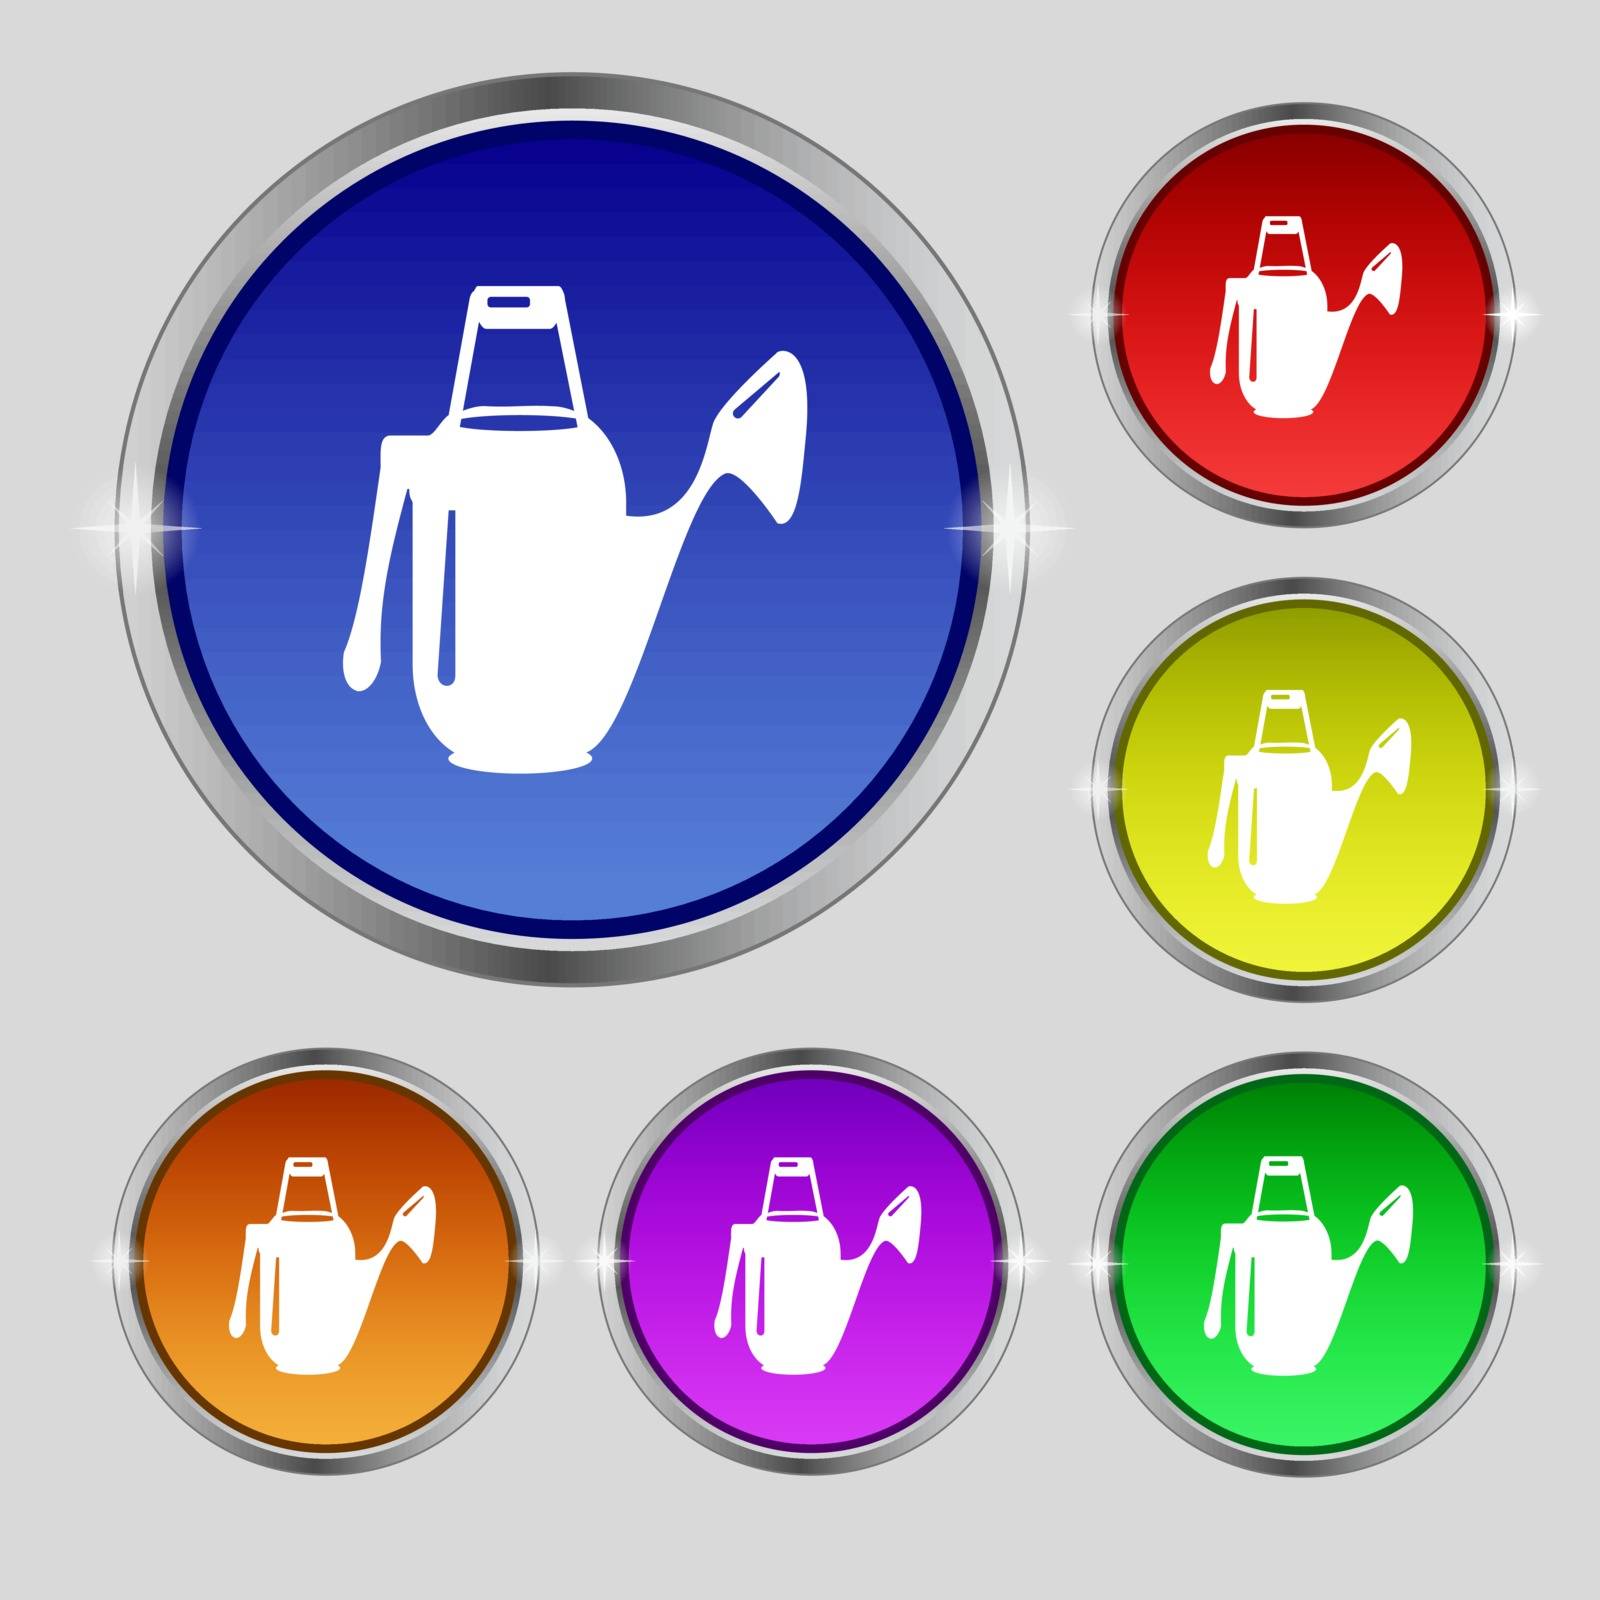 Watering can icon sign. Round symbol on bright colourful buttons. Vector illustration